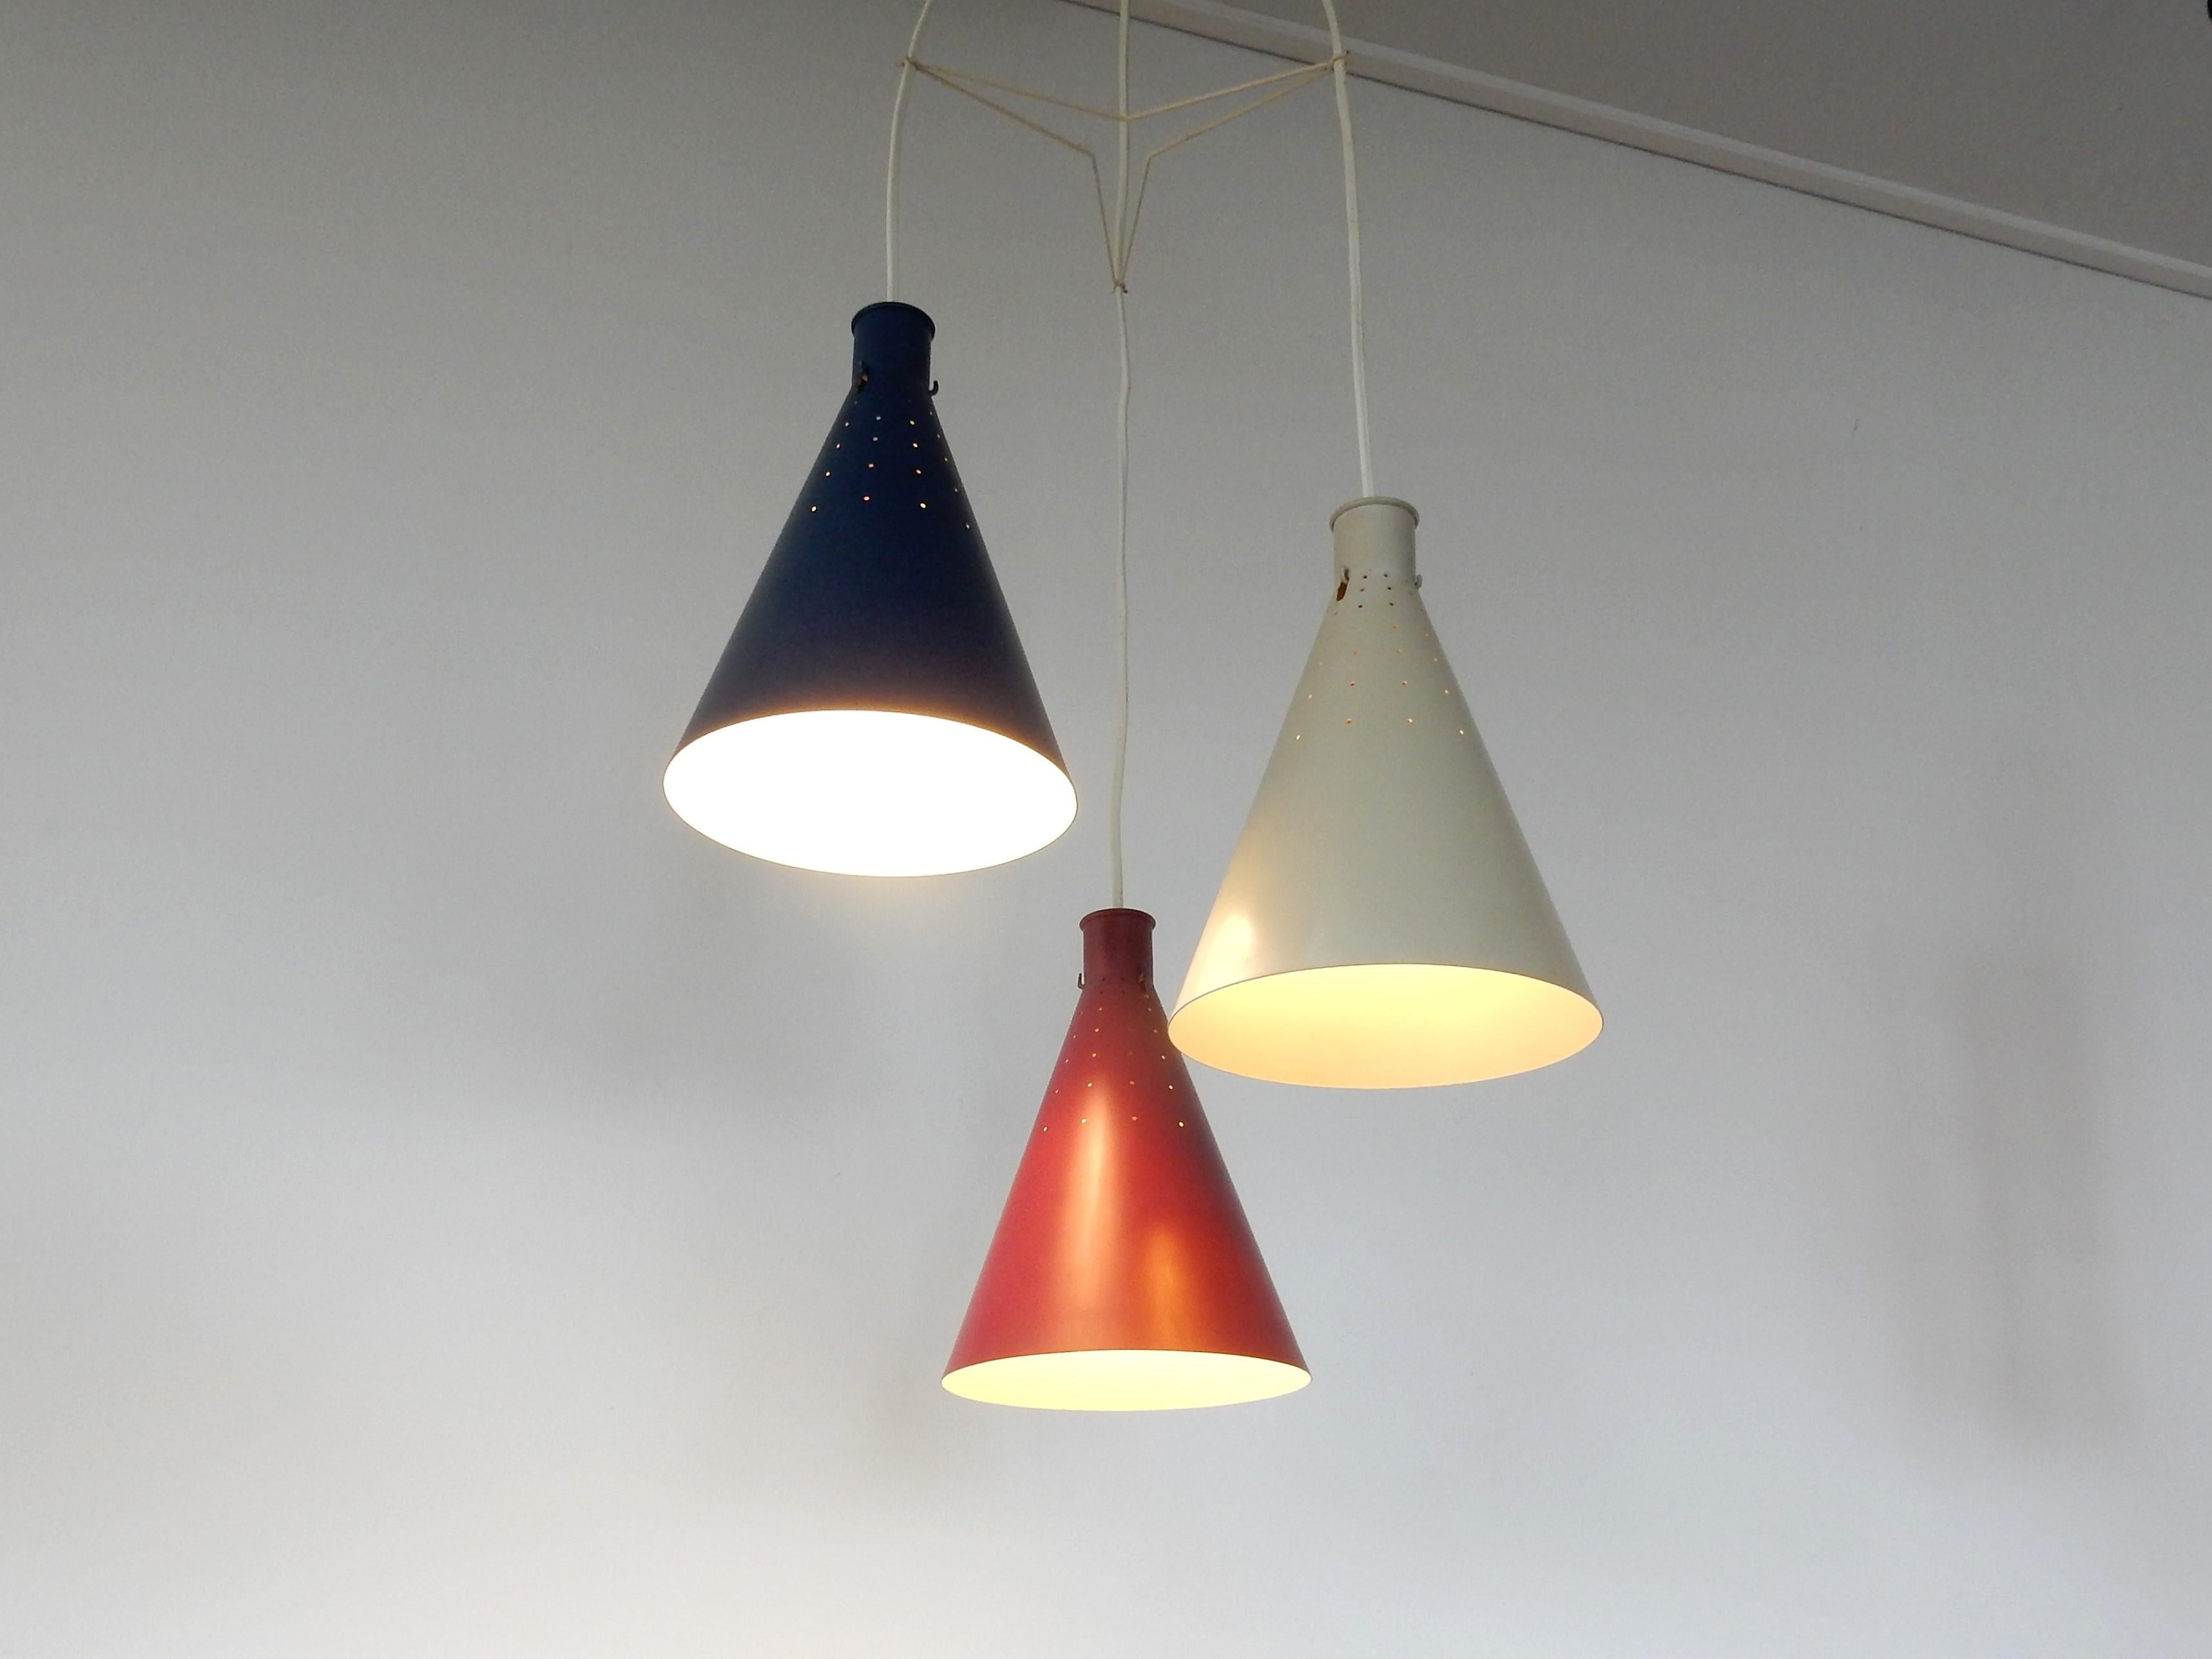 This very good looking set of 3 conical pendant lamps was designed by Alf Svensson for Bergboms in Sweden in the 1950s. It consists of 3 metal shades in red, grey and blue lacquer. The shades are perforated with small holes that gives a stunning